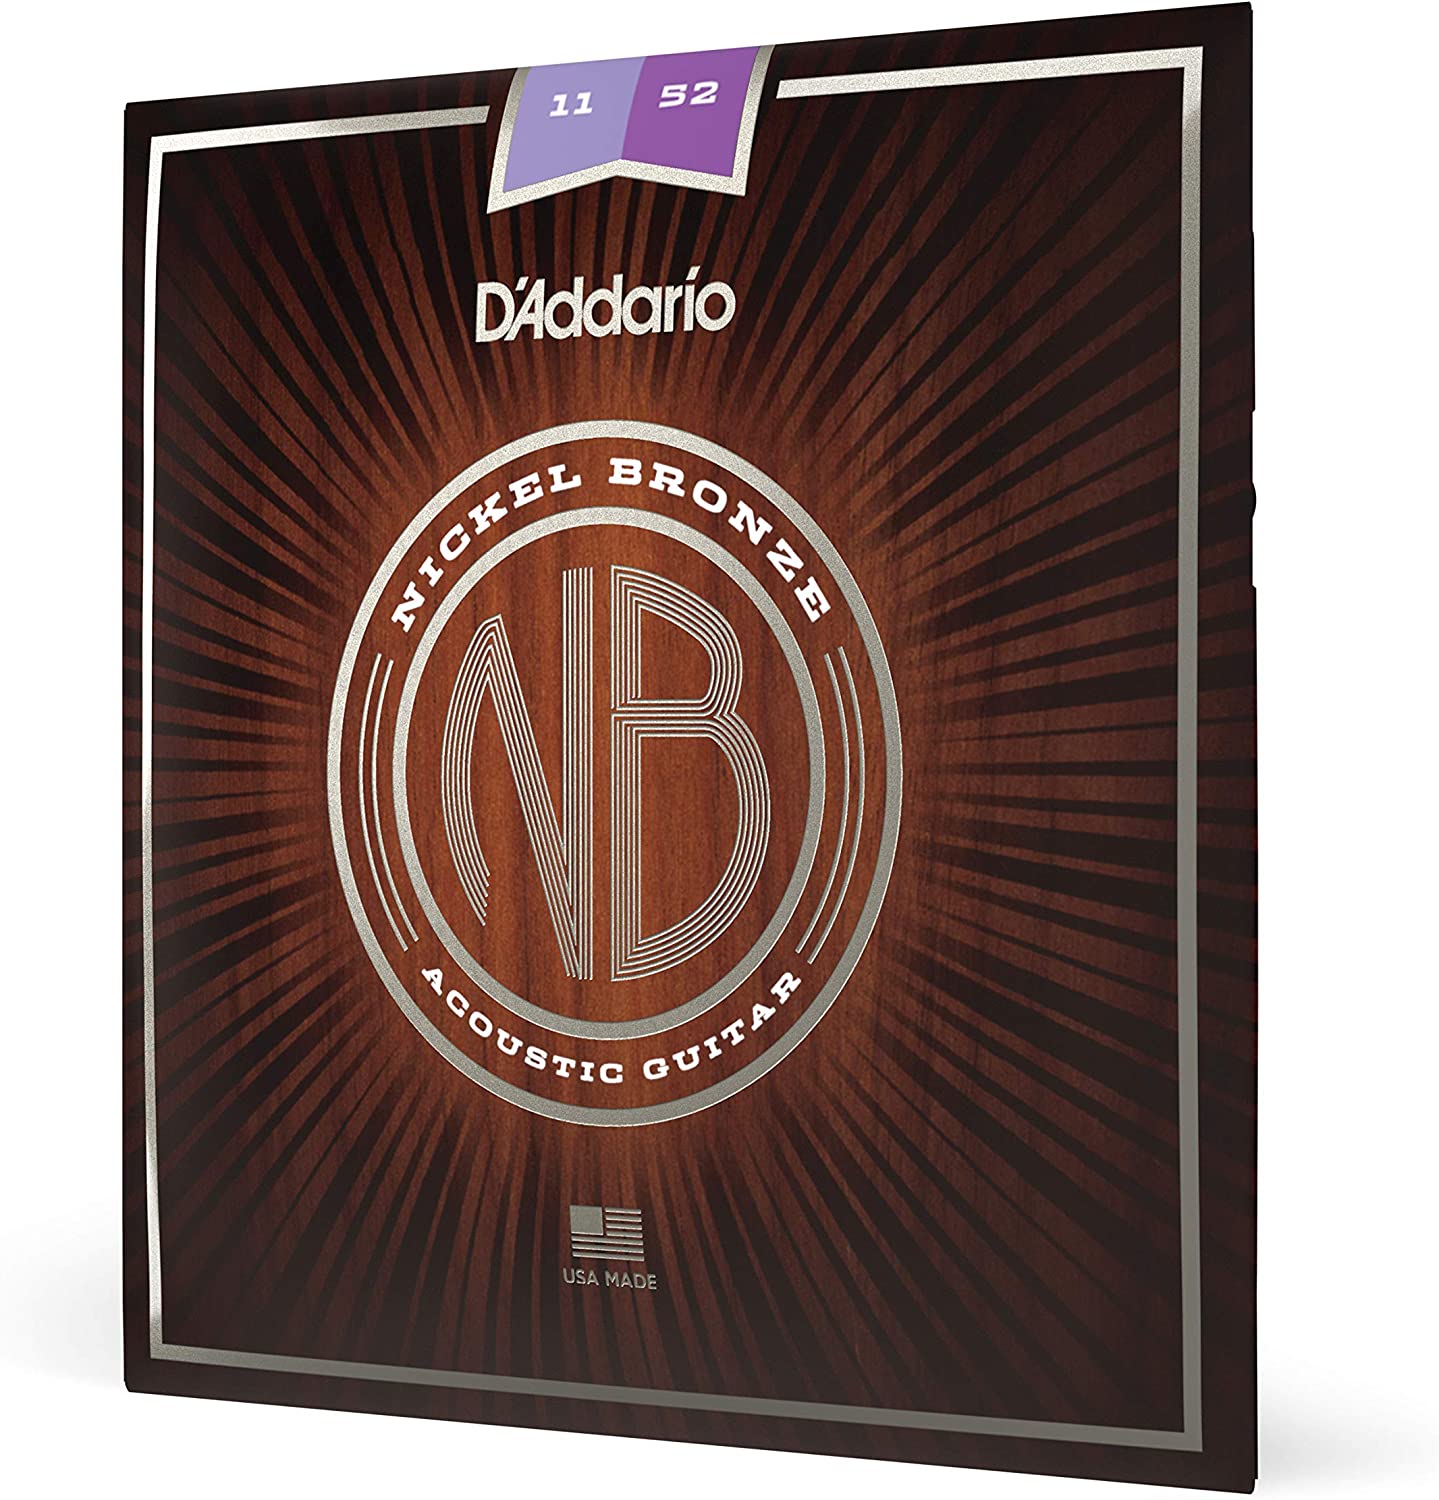 D'Addario Guitar Strings Nickel Bronze on a white background